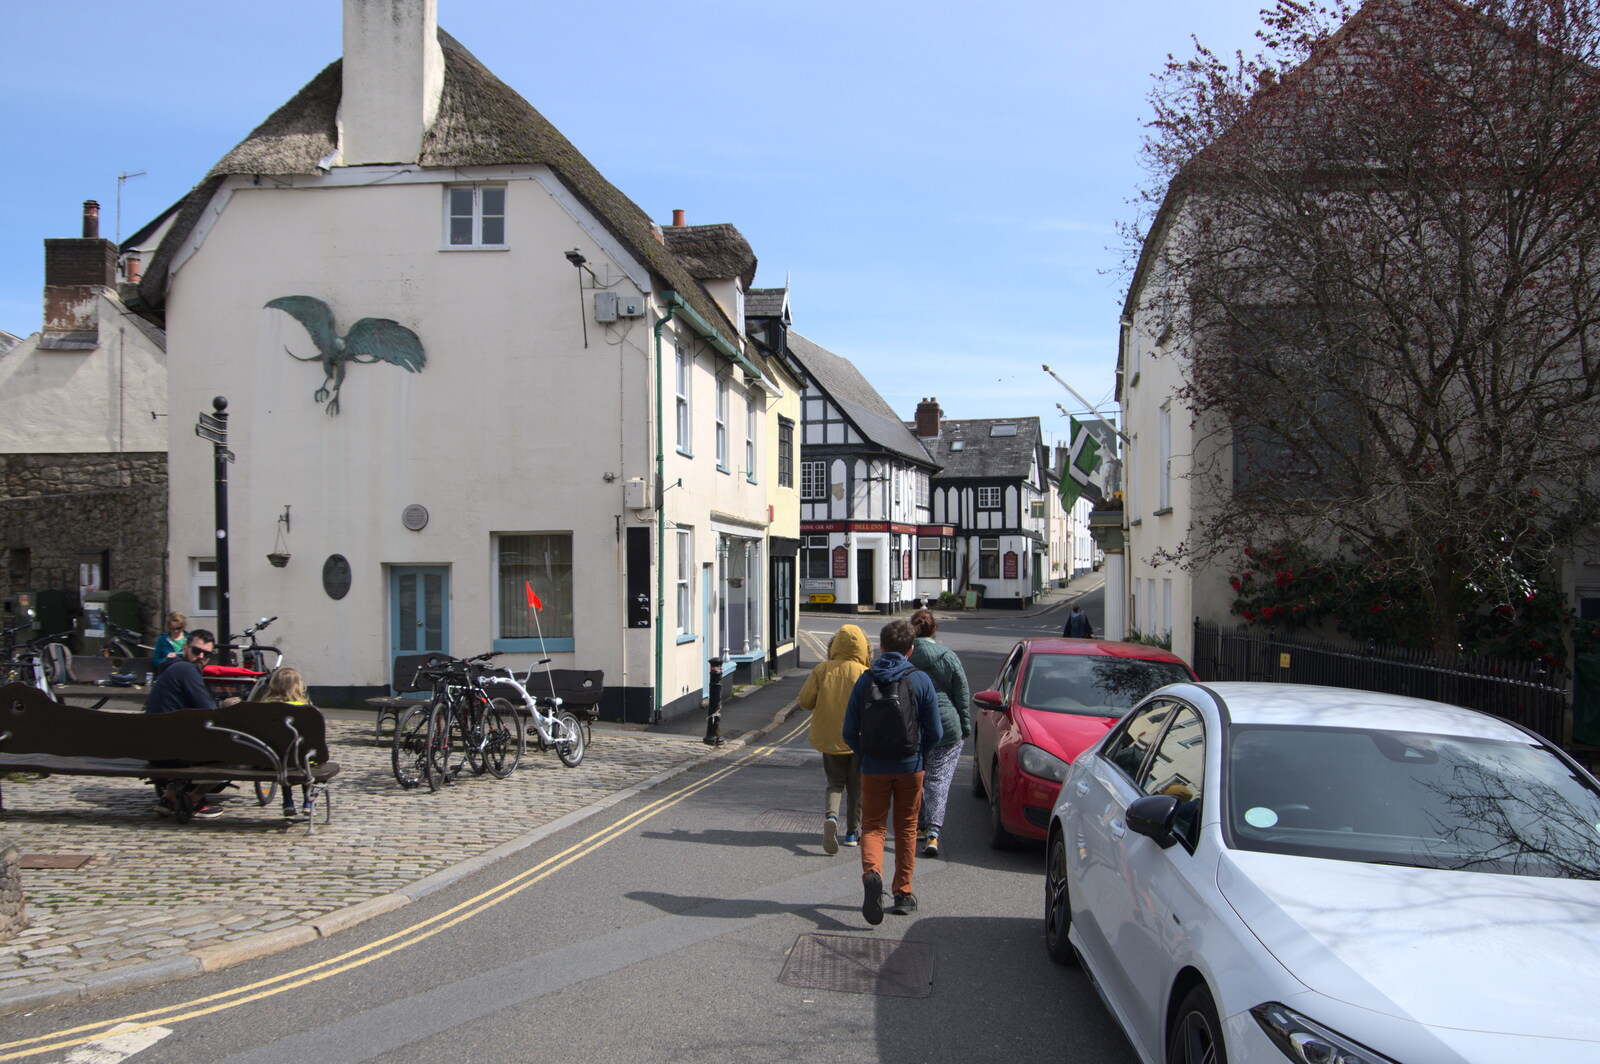 We head off to explore Moretonhampstead from Easter in South Zeal and Moretonhampstead, Devon - 9th April